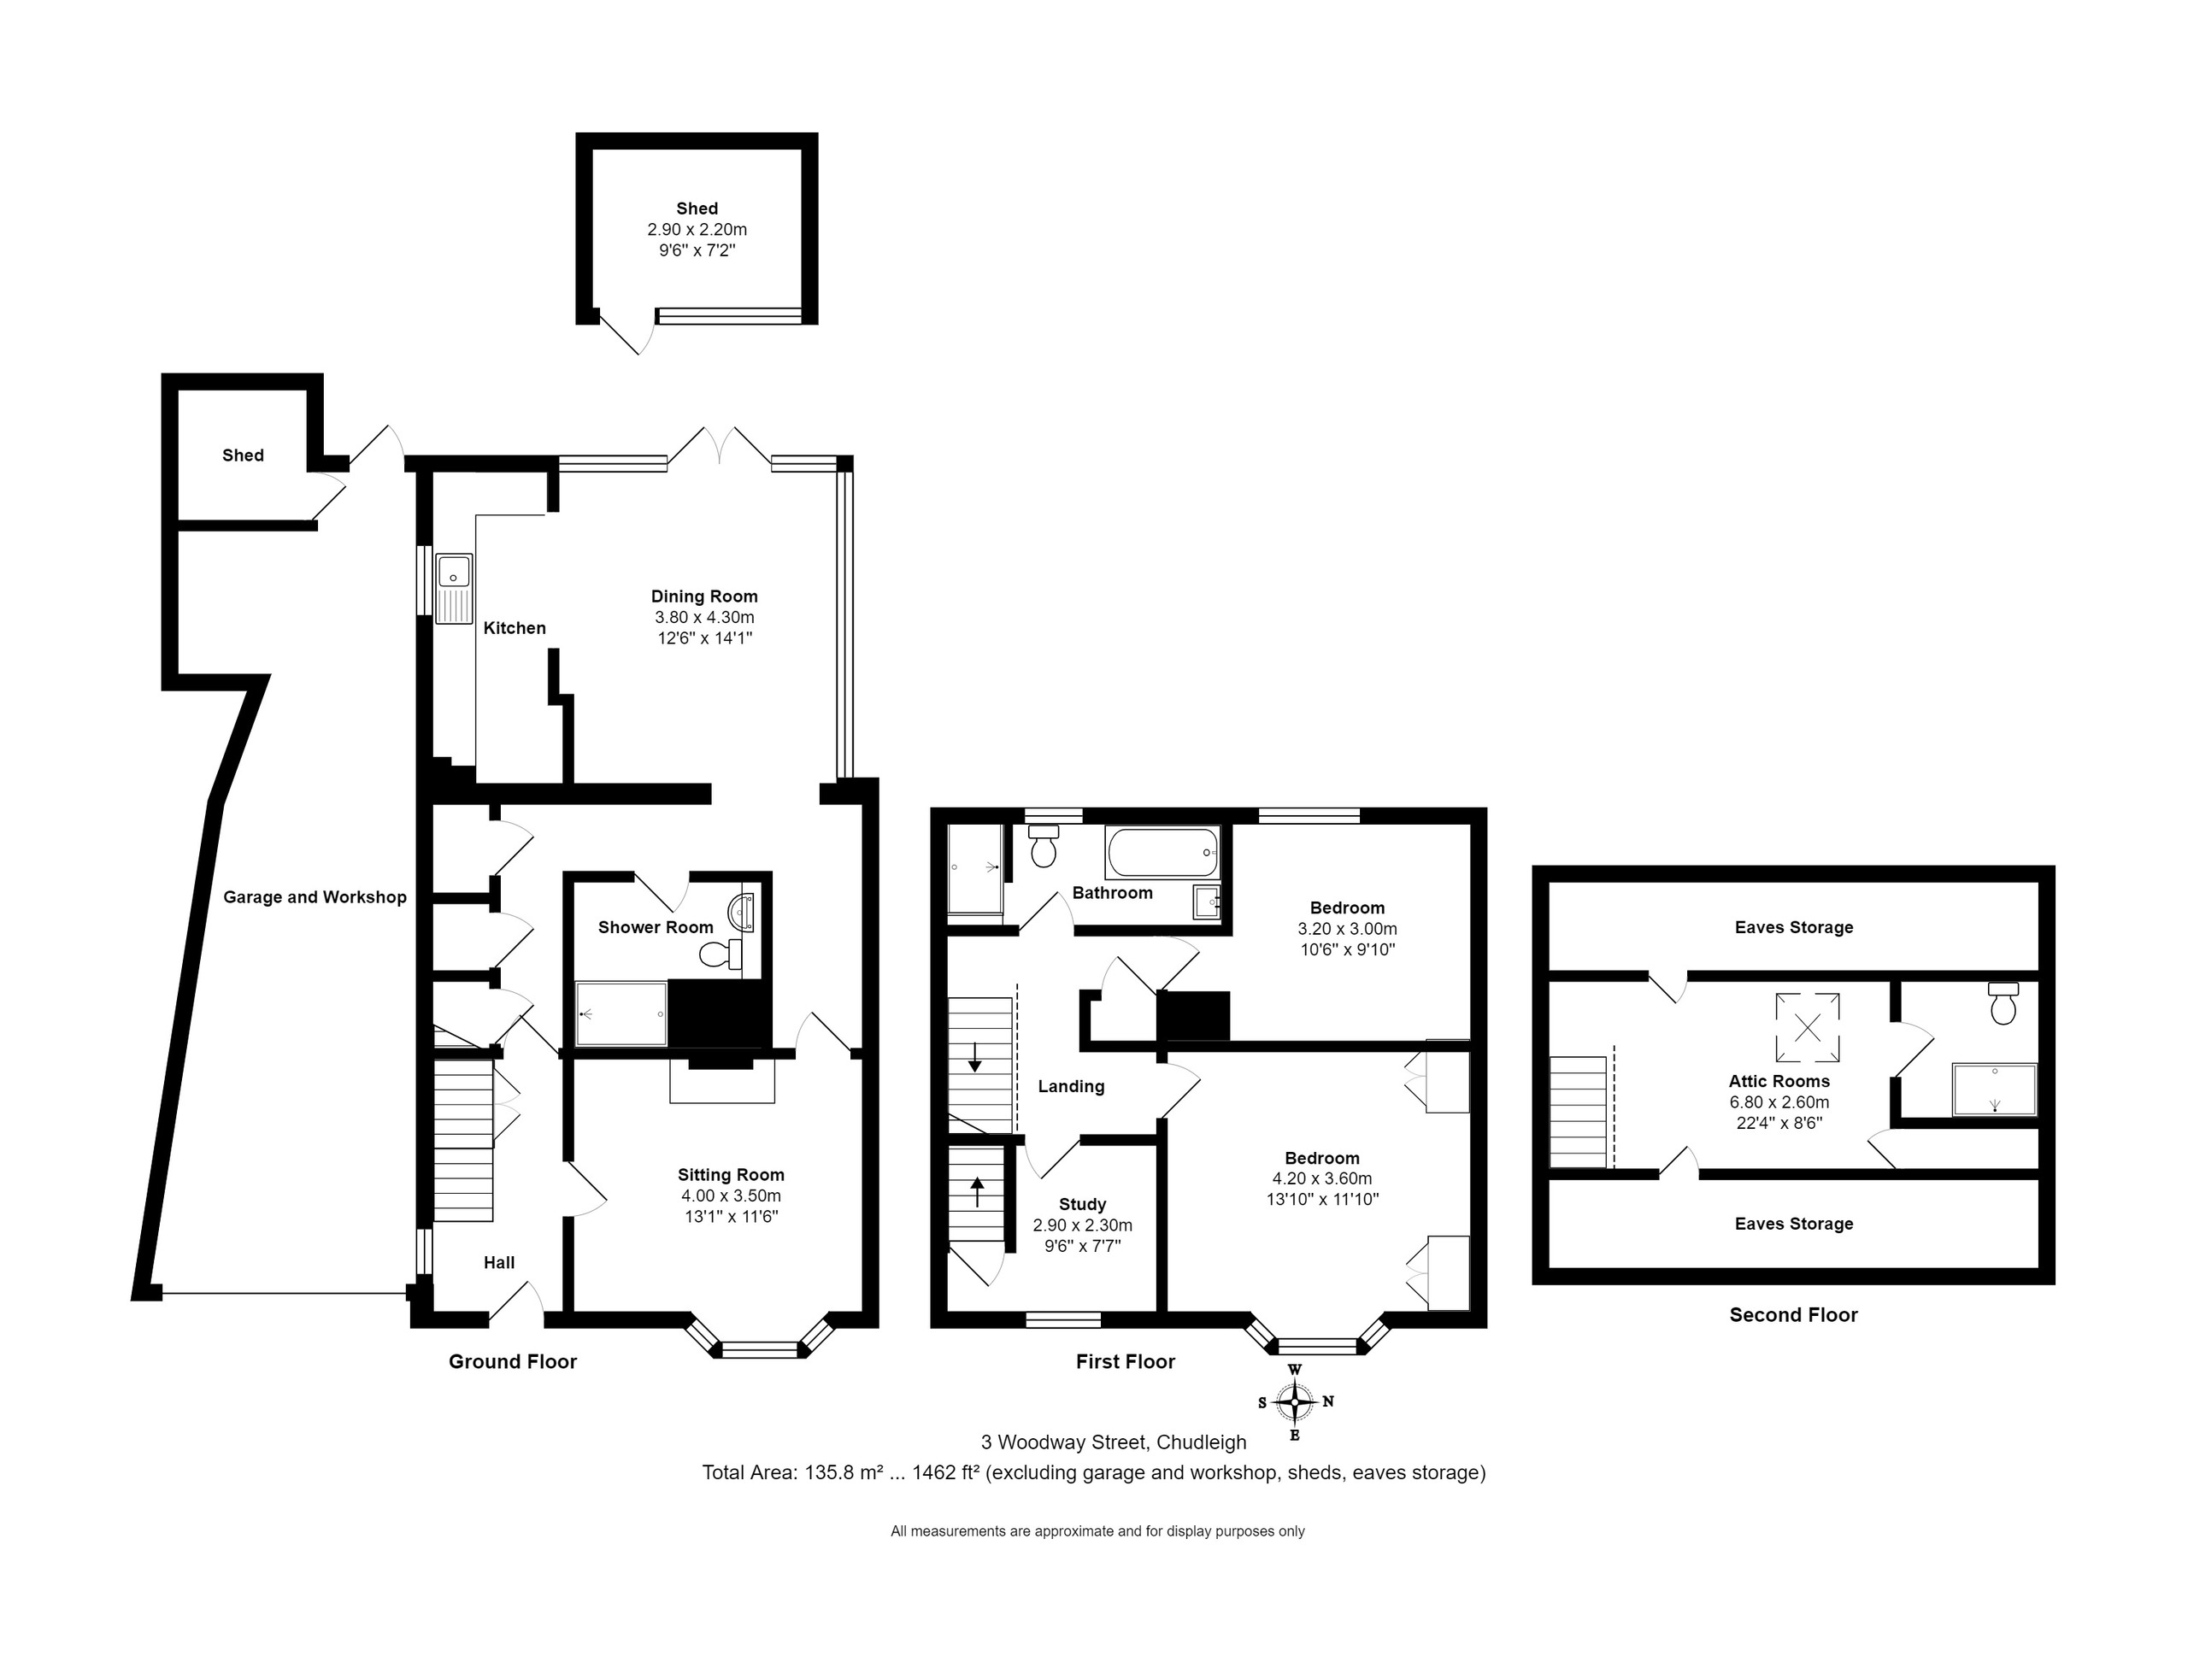 3 bed end of terrace house for sale in Chudleigh, Chudleigh - Property floorplan